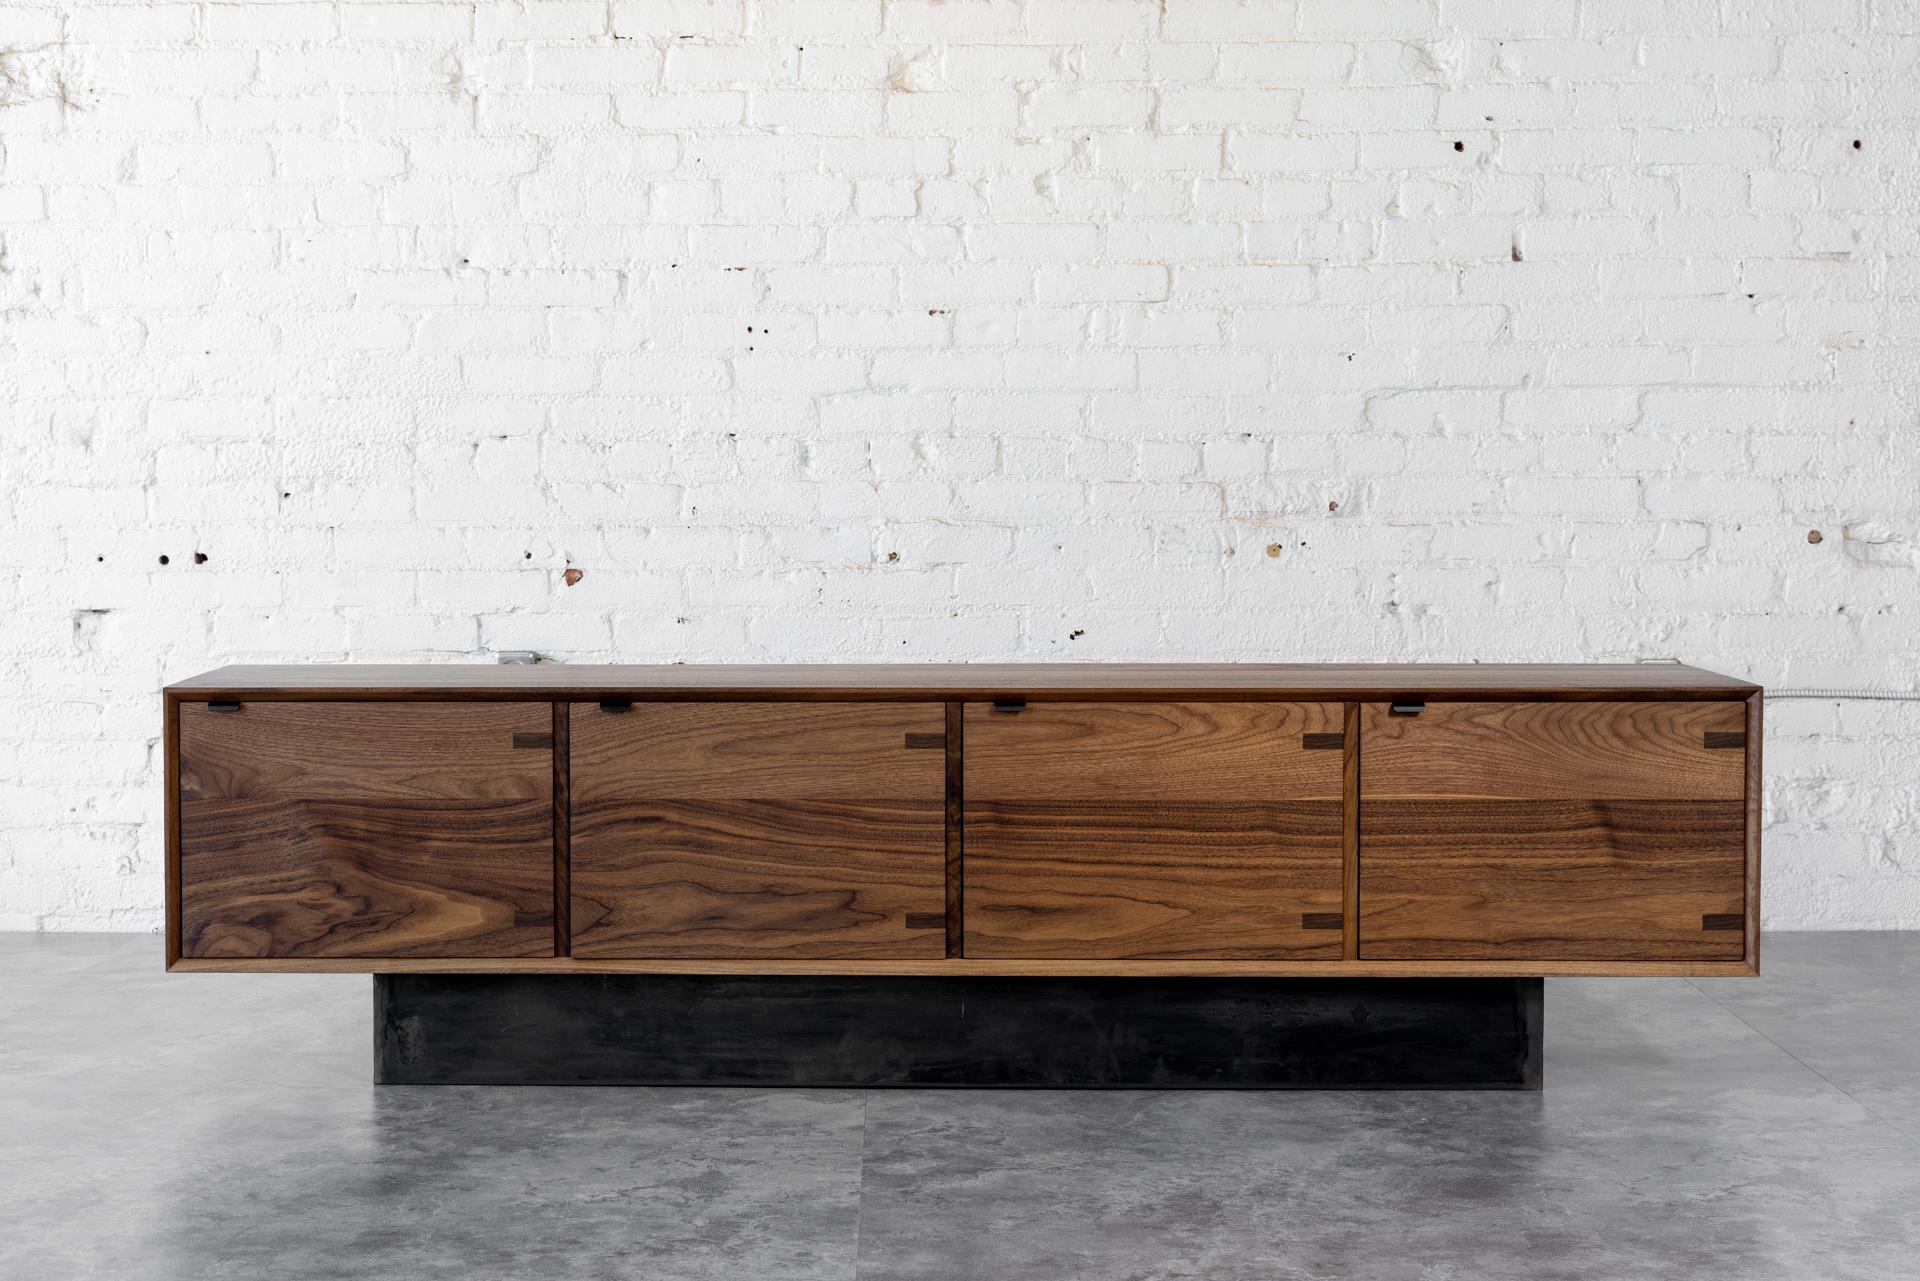 The Baxter walnut low Credenza has a sleek profile, showcasing four cabinet doors. The credenza uses all solid black walnut constructed with, an uncommonly practiced, entirely solid wood carcass, interior shelves, and credenza doors. Black steel